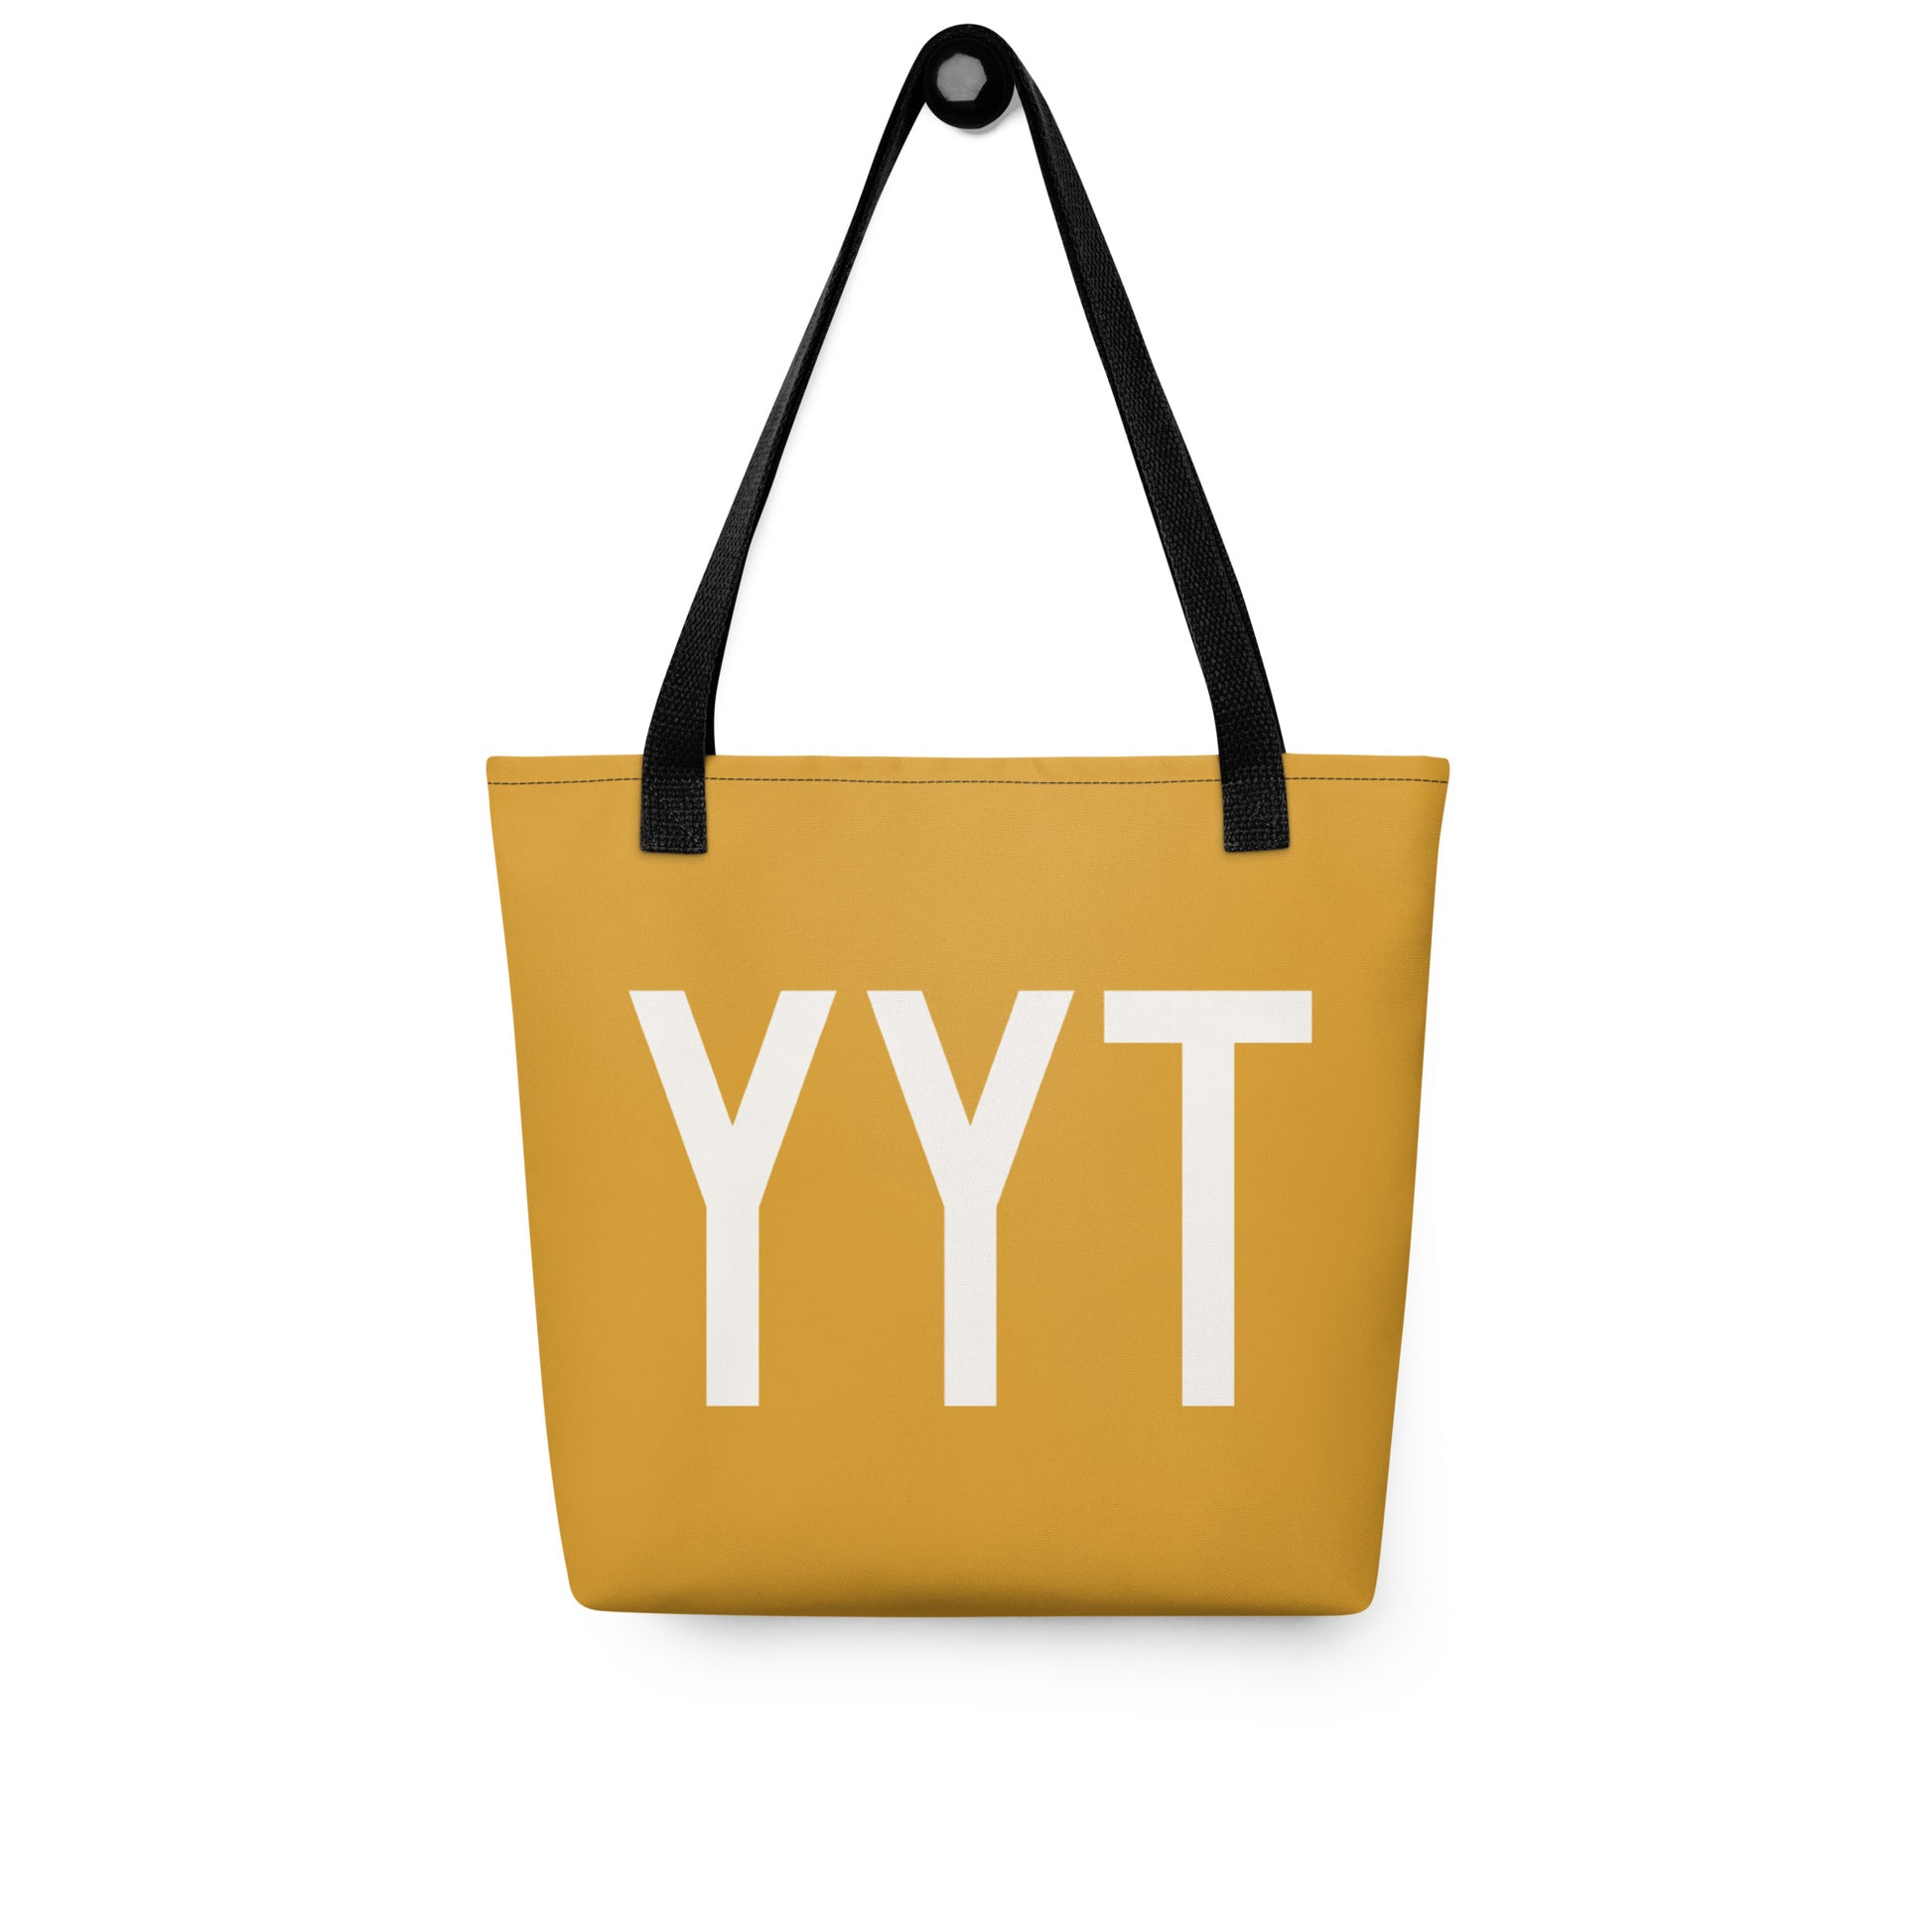 Aviation Gift Tote Bag - Buttercup • YYT St. John's • YHM Designs - Image 03